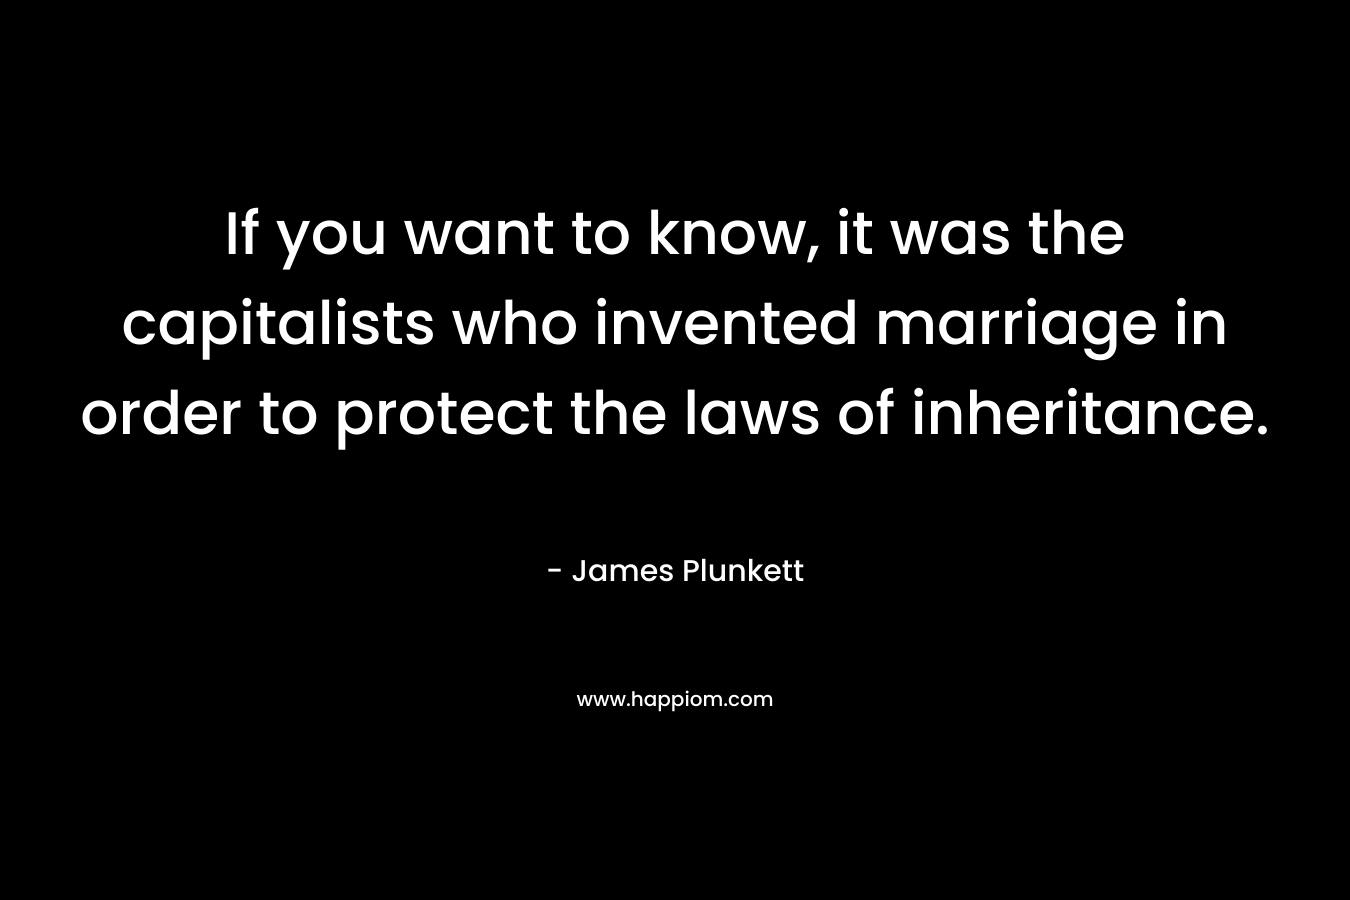 If you want to know, it was the capitalists who invented marriage in order to protect the laws of inheritance.